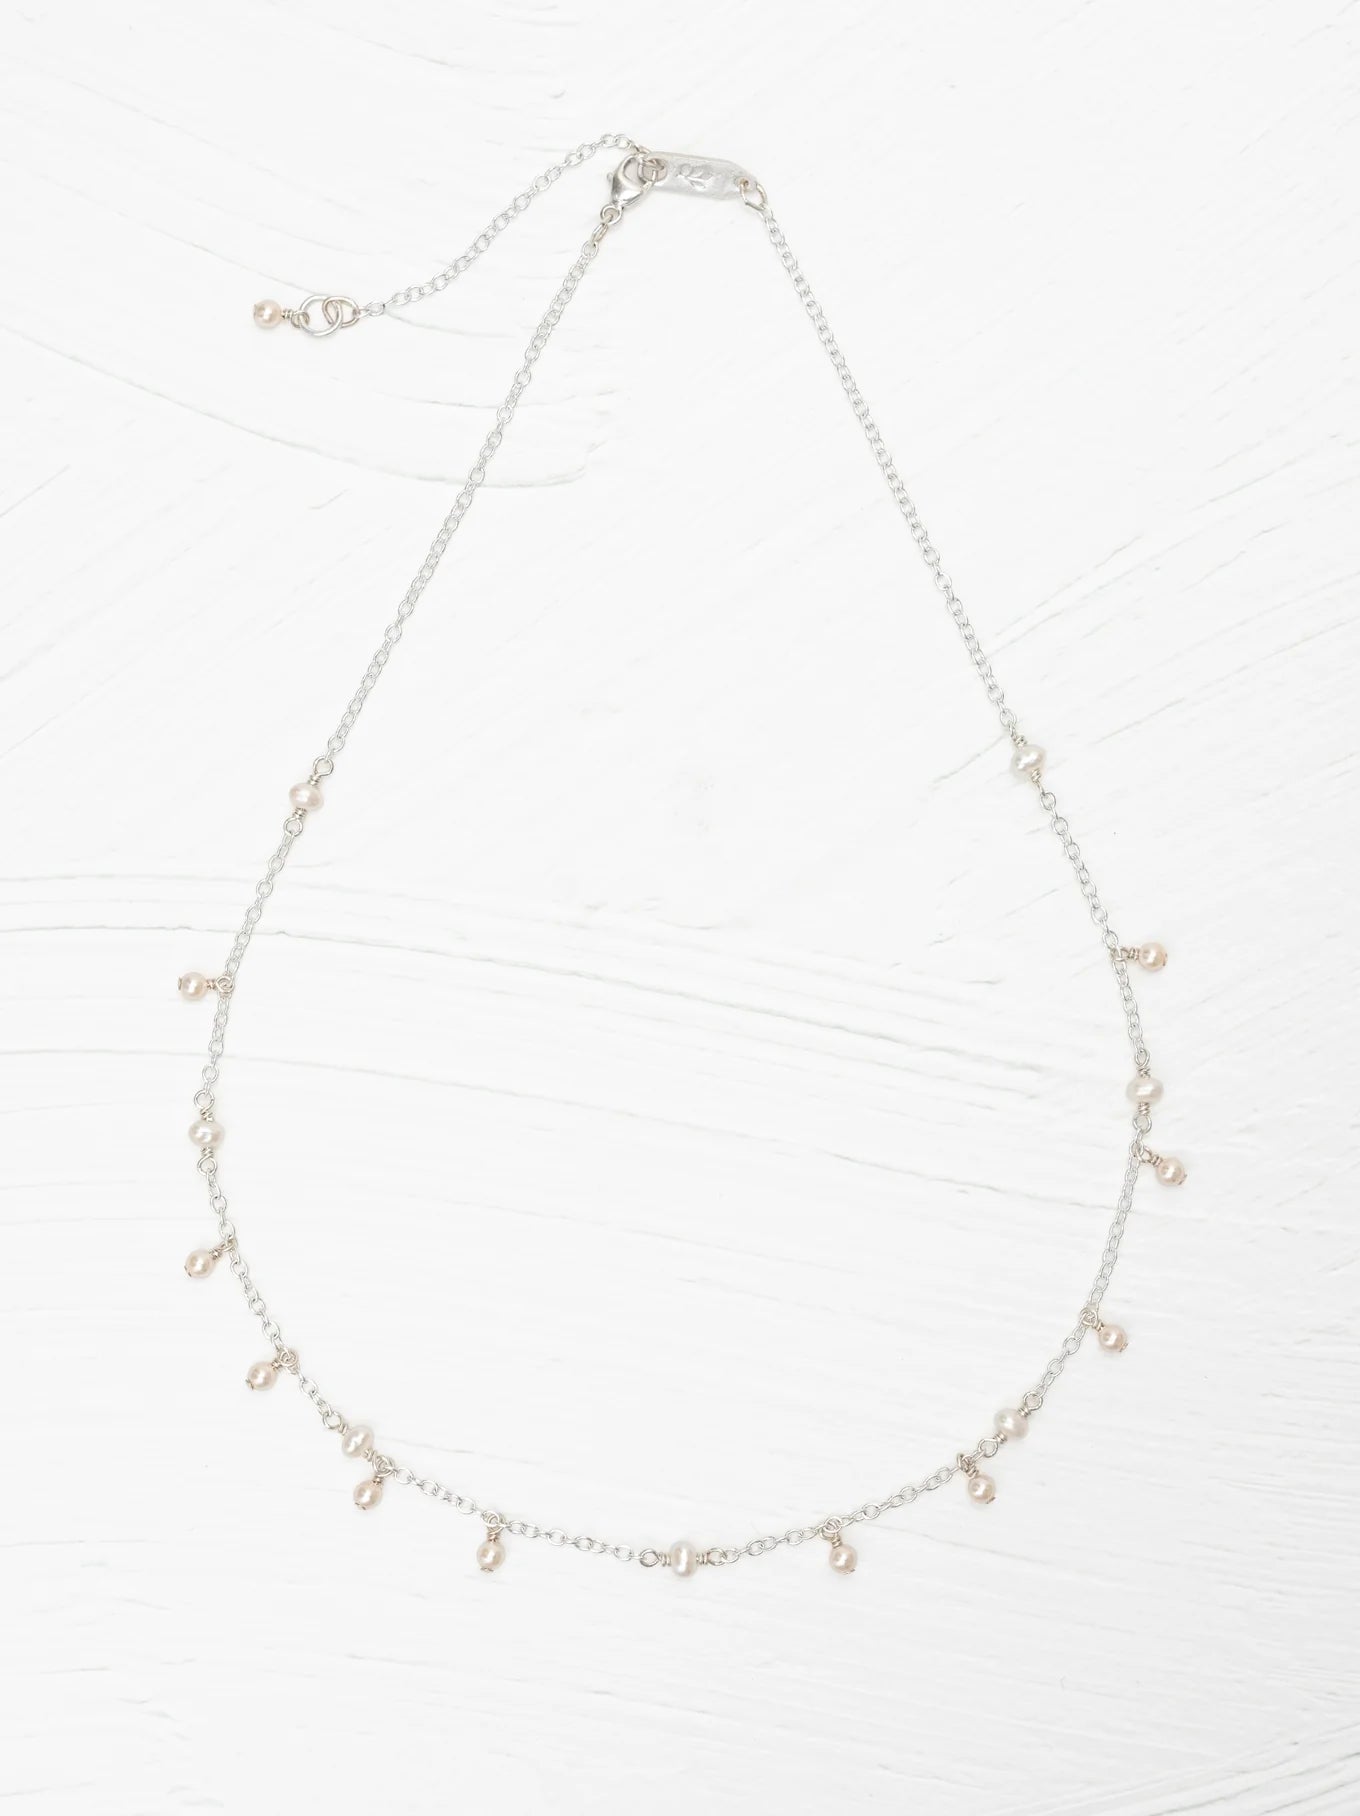 Holly Yashi Cora Pearl Necklace - Silver / White    